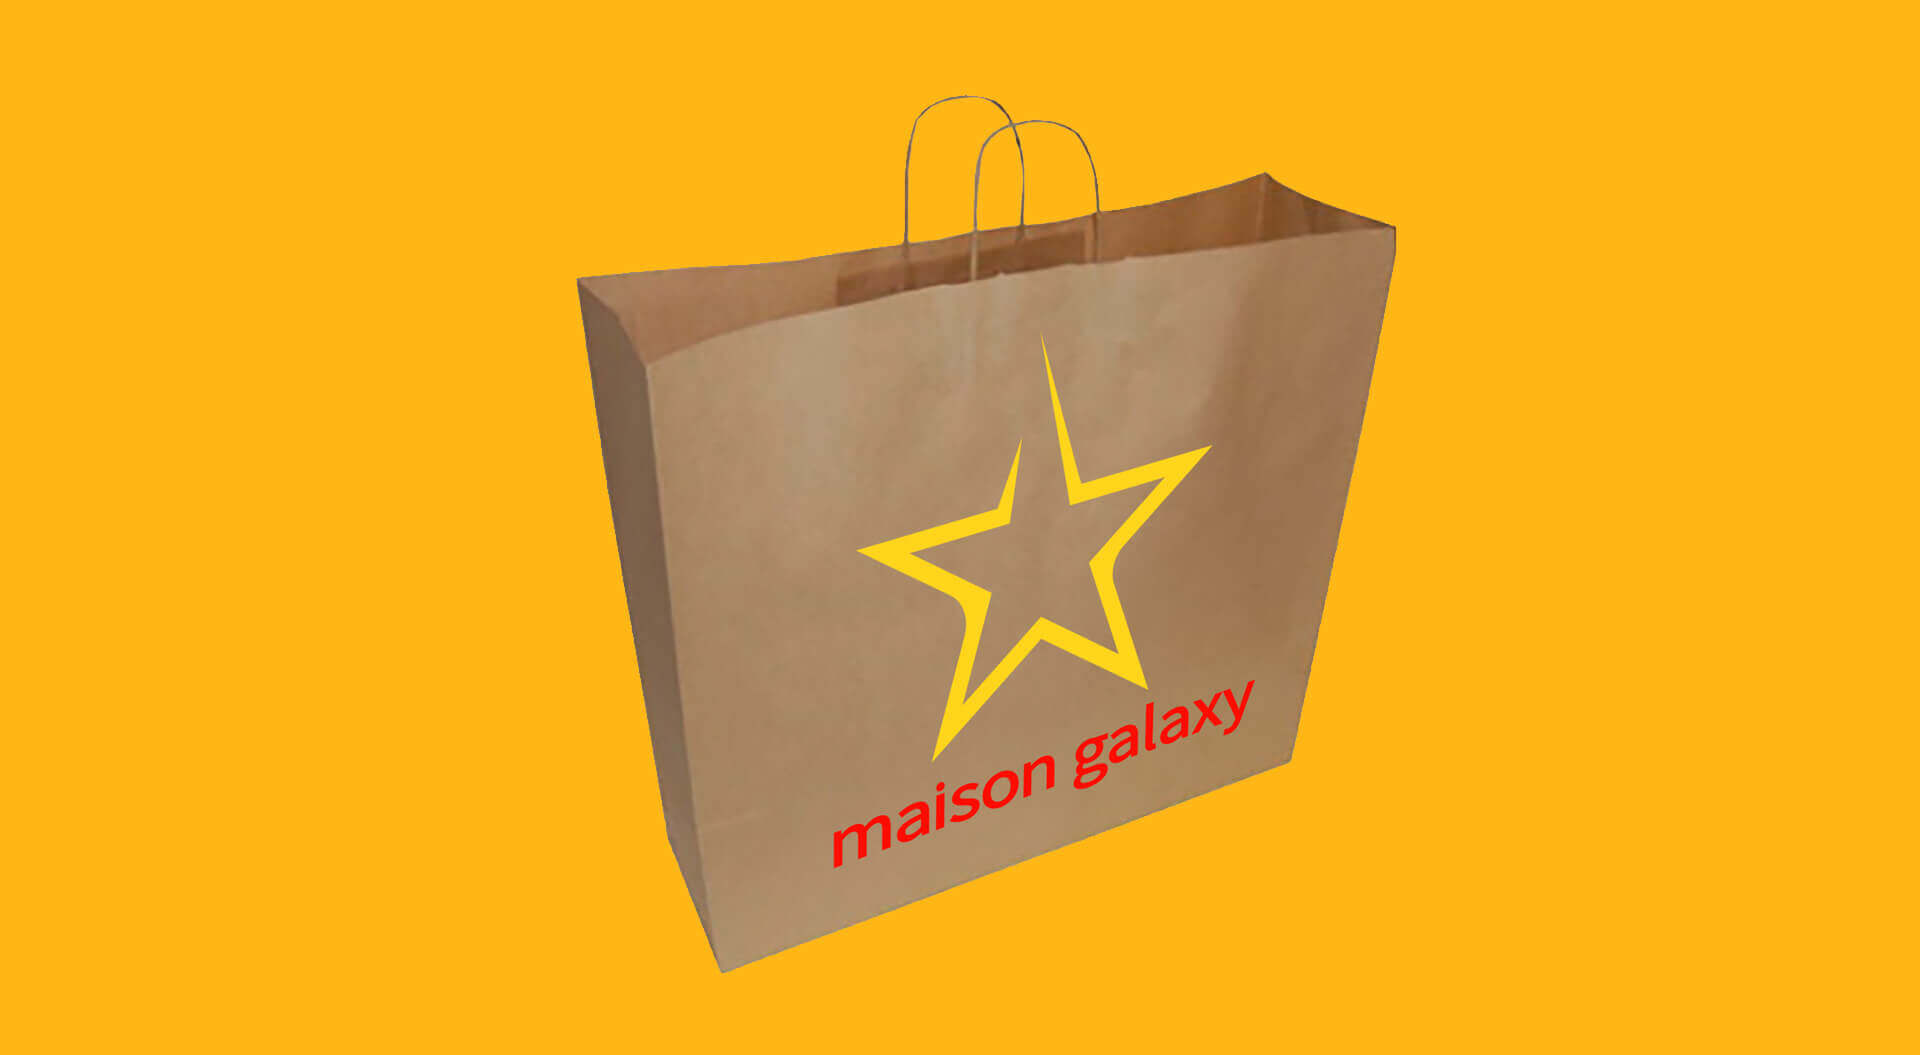 Maison Galaxy, Store Bag, Interior Design, Supermarket, Fashion, Drive Sales and Increase Brand Loyalty, General Retail, Graphic Communications Branding - CampbellRigg Agency